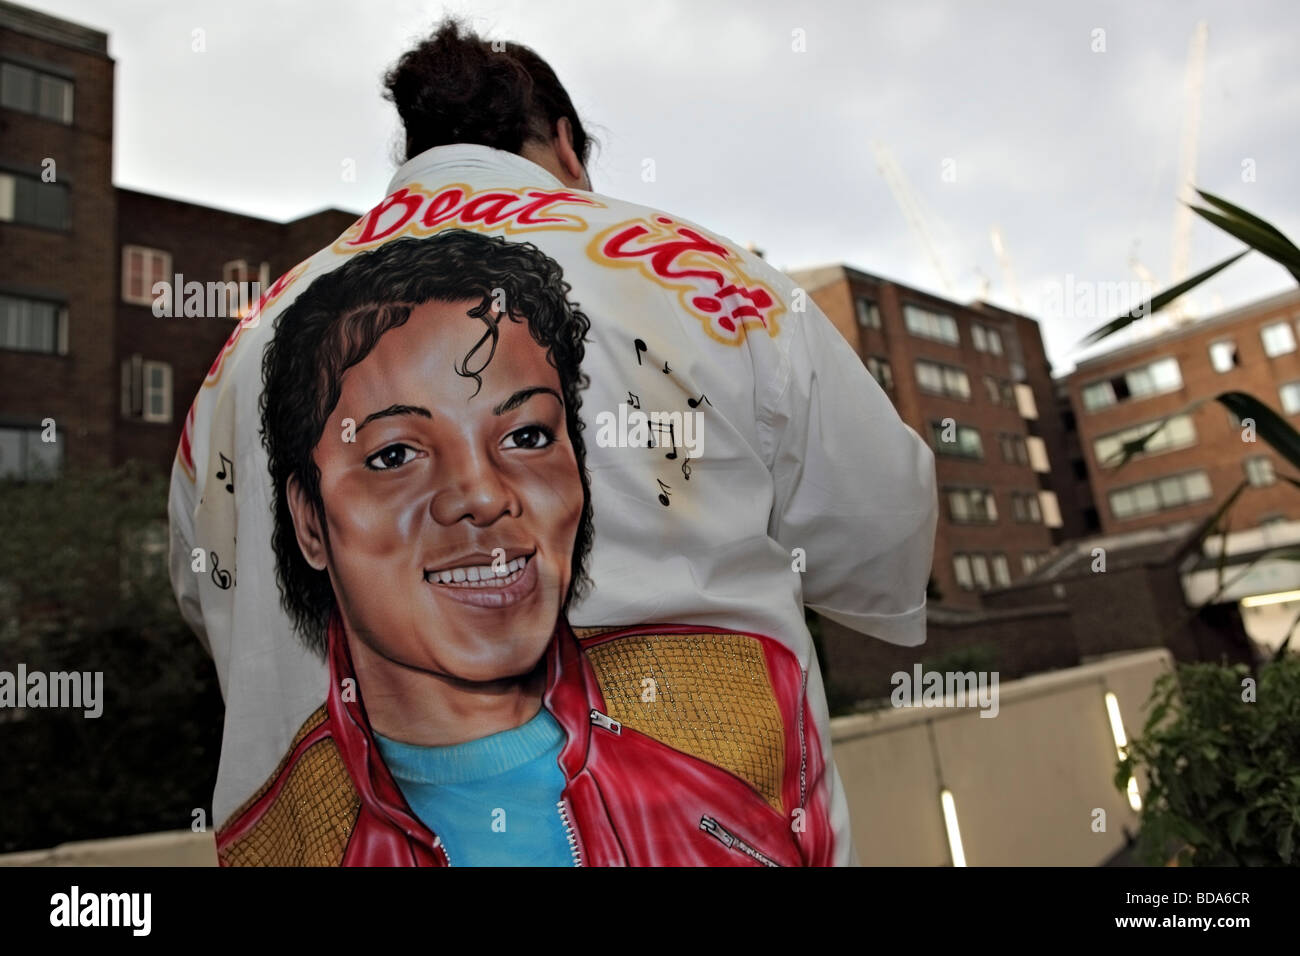 Michael Jackson's fan poses with customized shirt within a UK council estate. Stock Photo